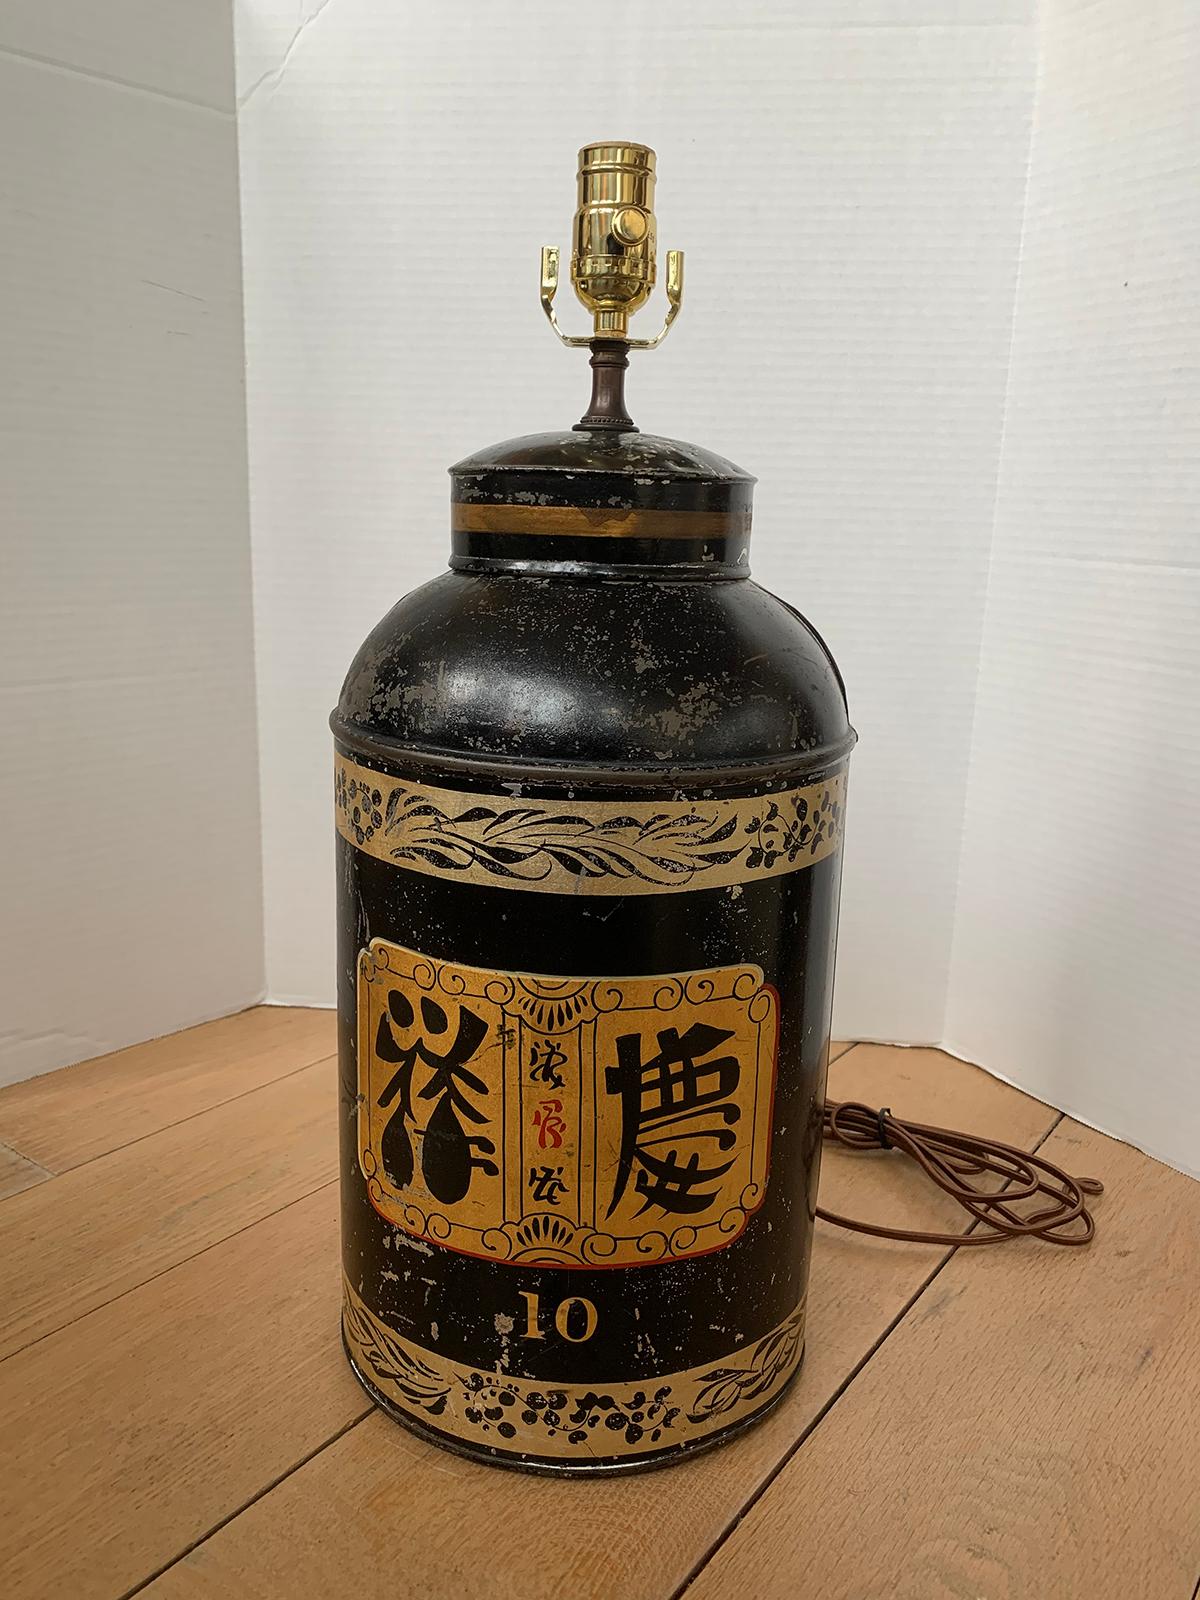 19th century English chinoiserie toleware tea tin as lamp by Rudduck & Comp of London, Labeled
New wiring.